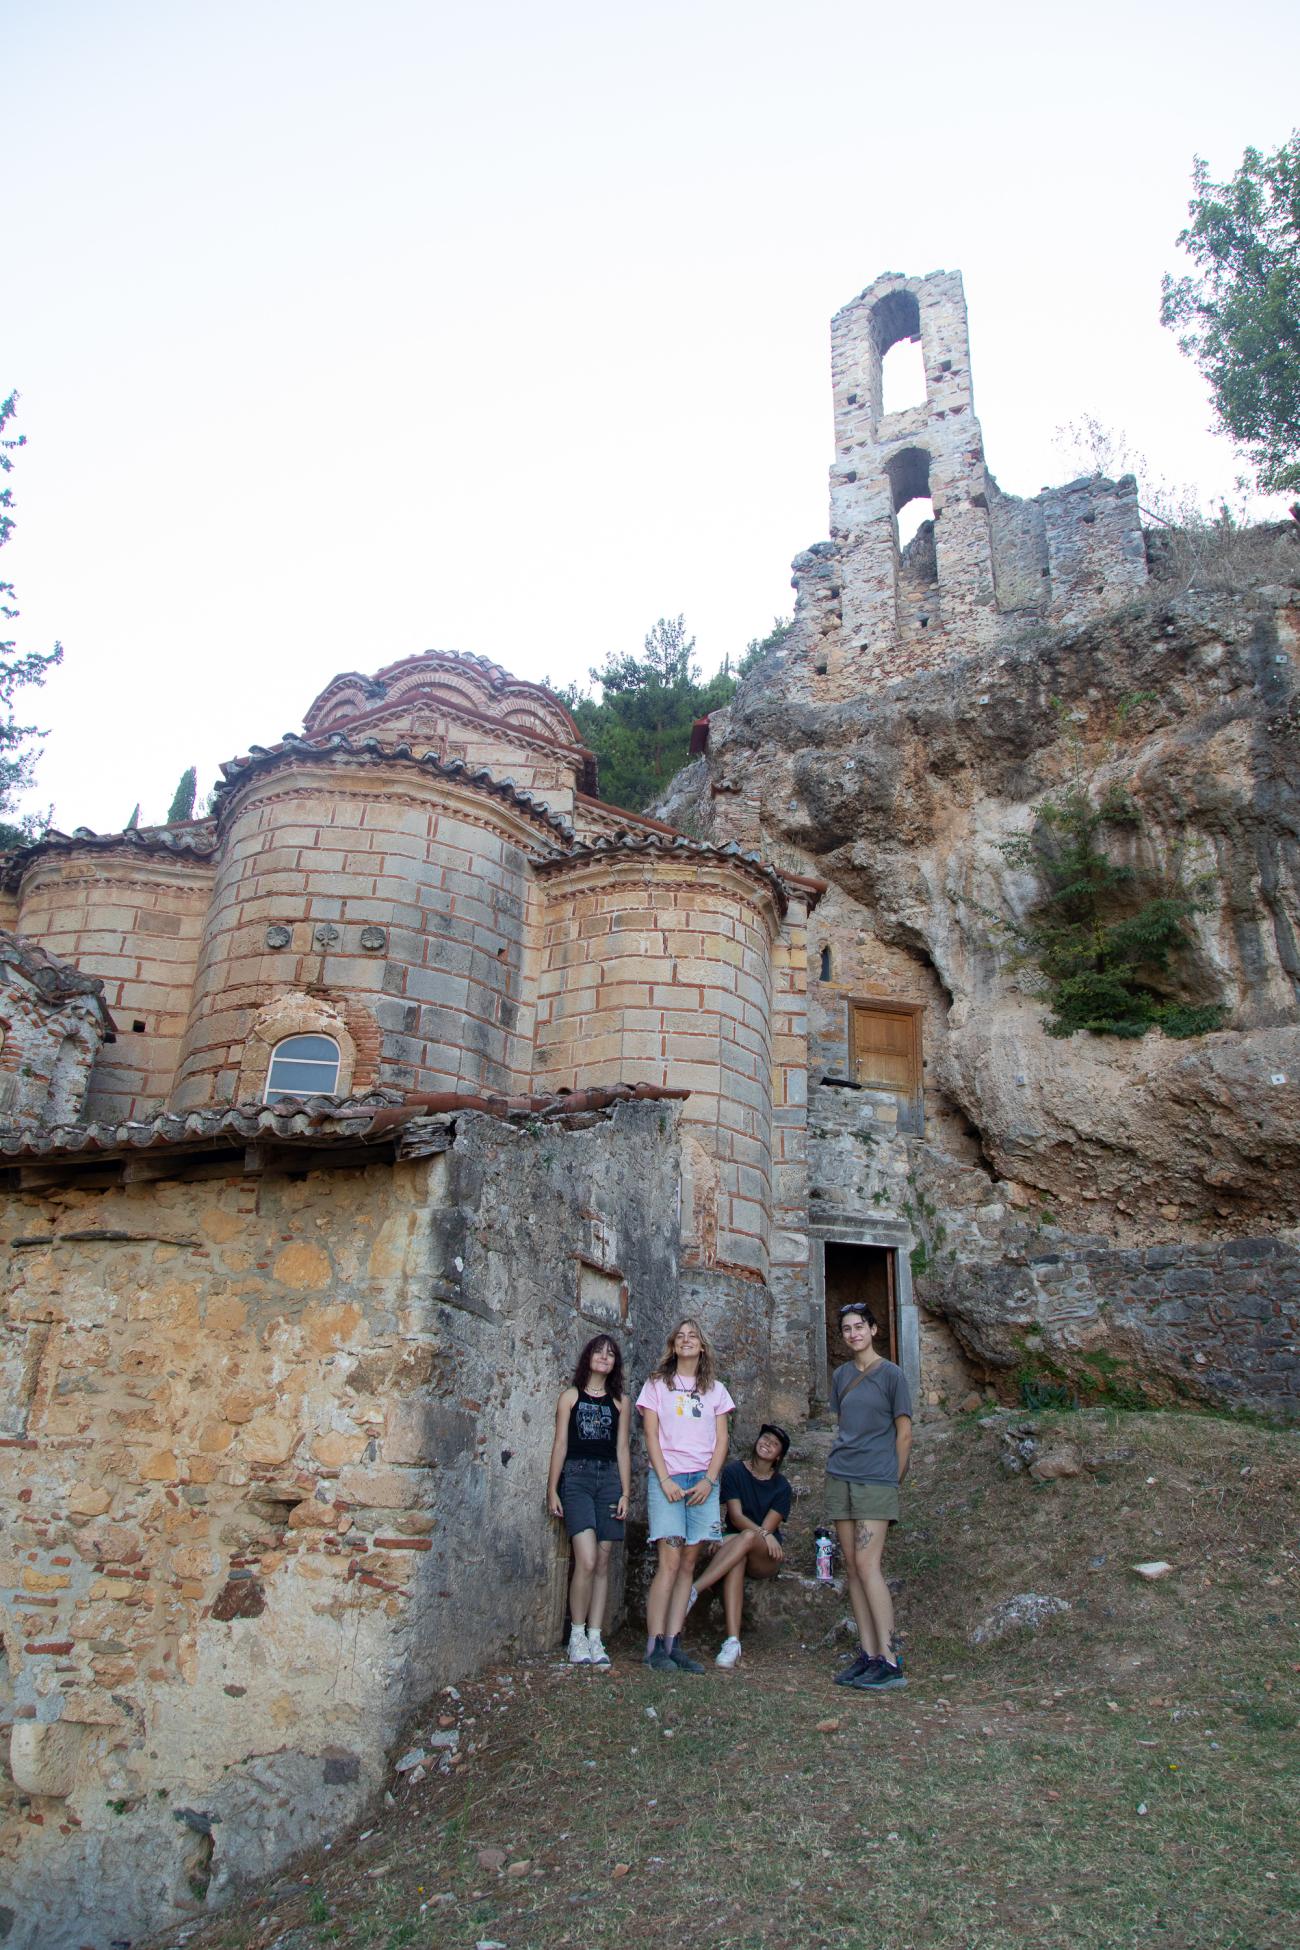 Sophia, Zoey, Indigo, and Violet smile in front of ruins of ancient Mystras